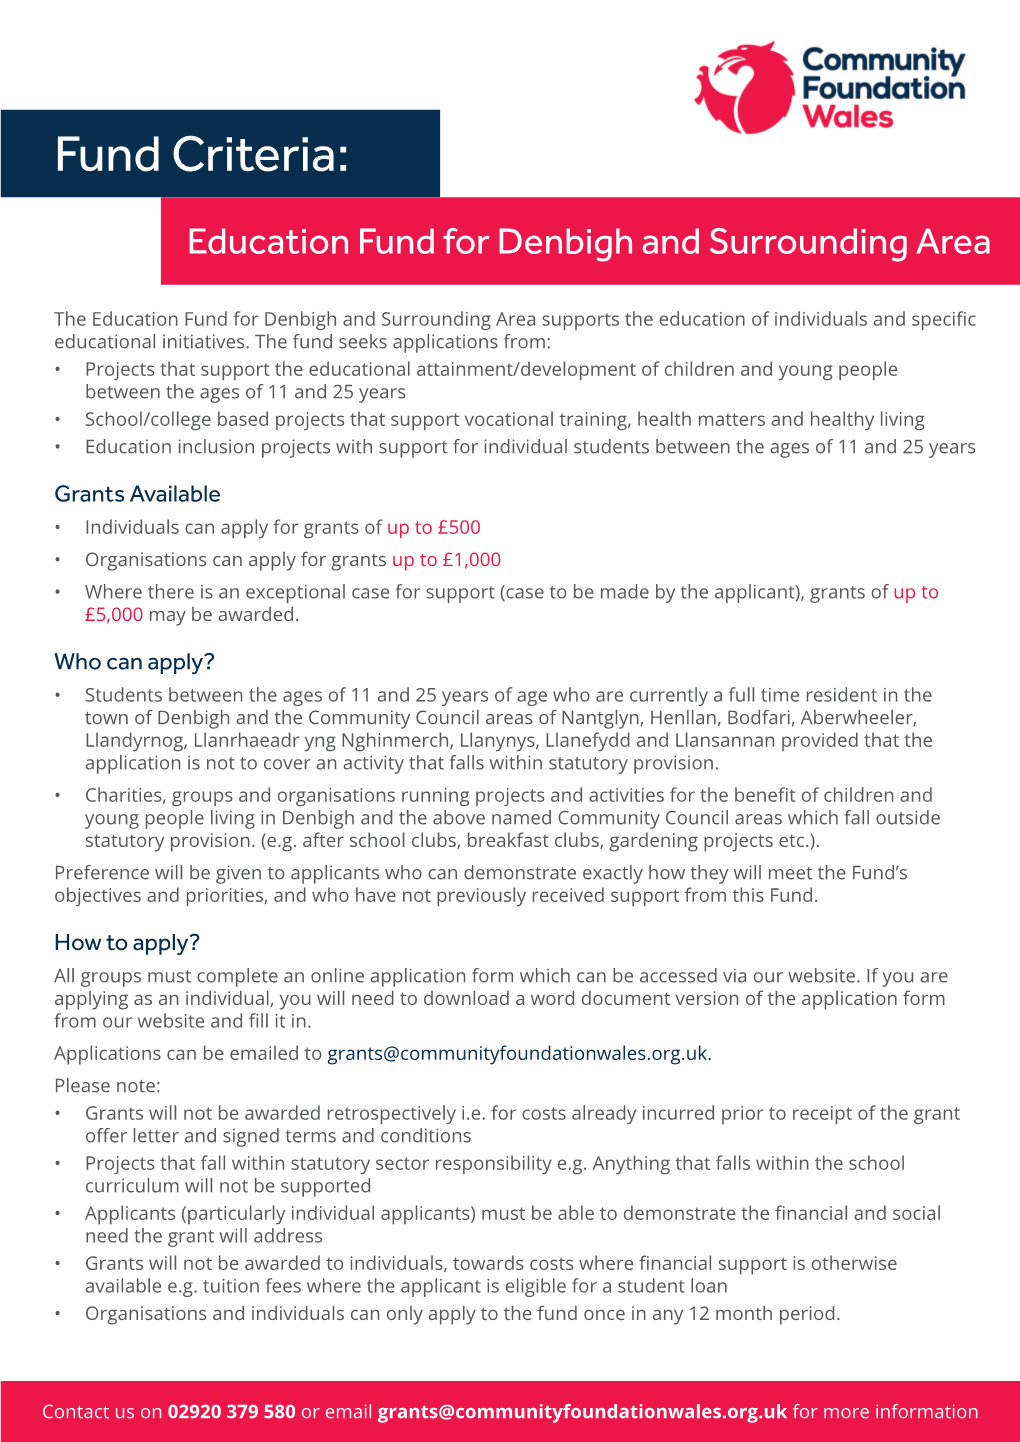 Fund Criteria: Education Fund for Denbigh and Surrounding Area